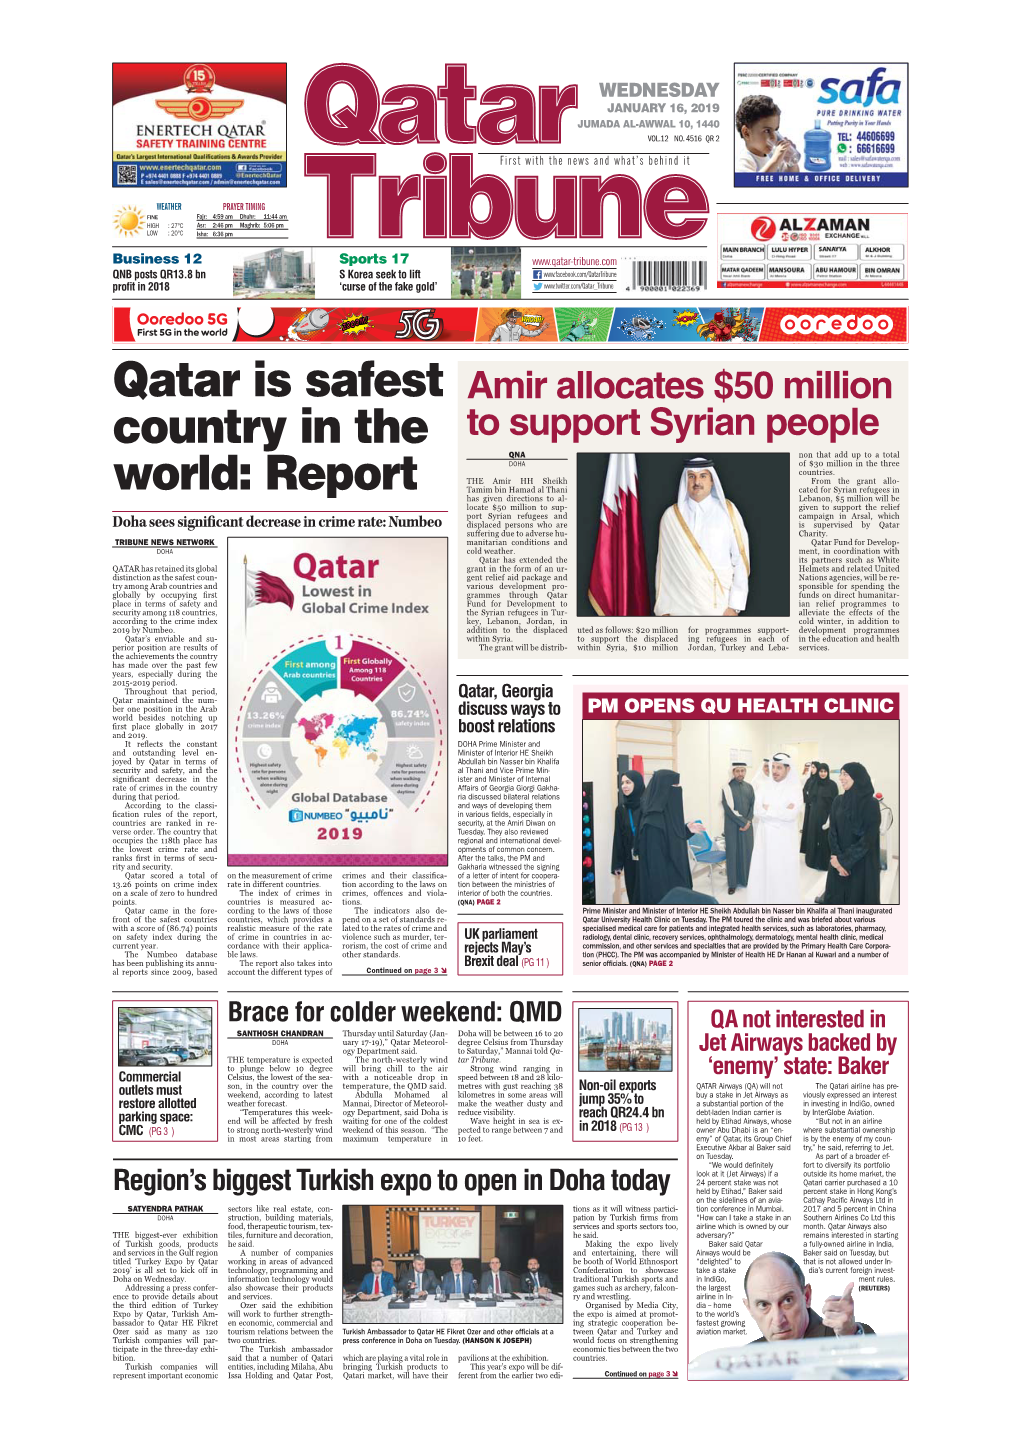 Qatar Is Safest Country in the World